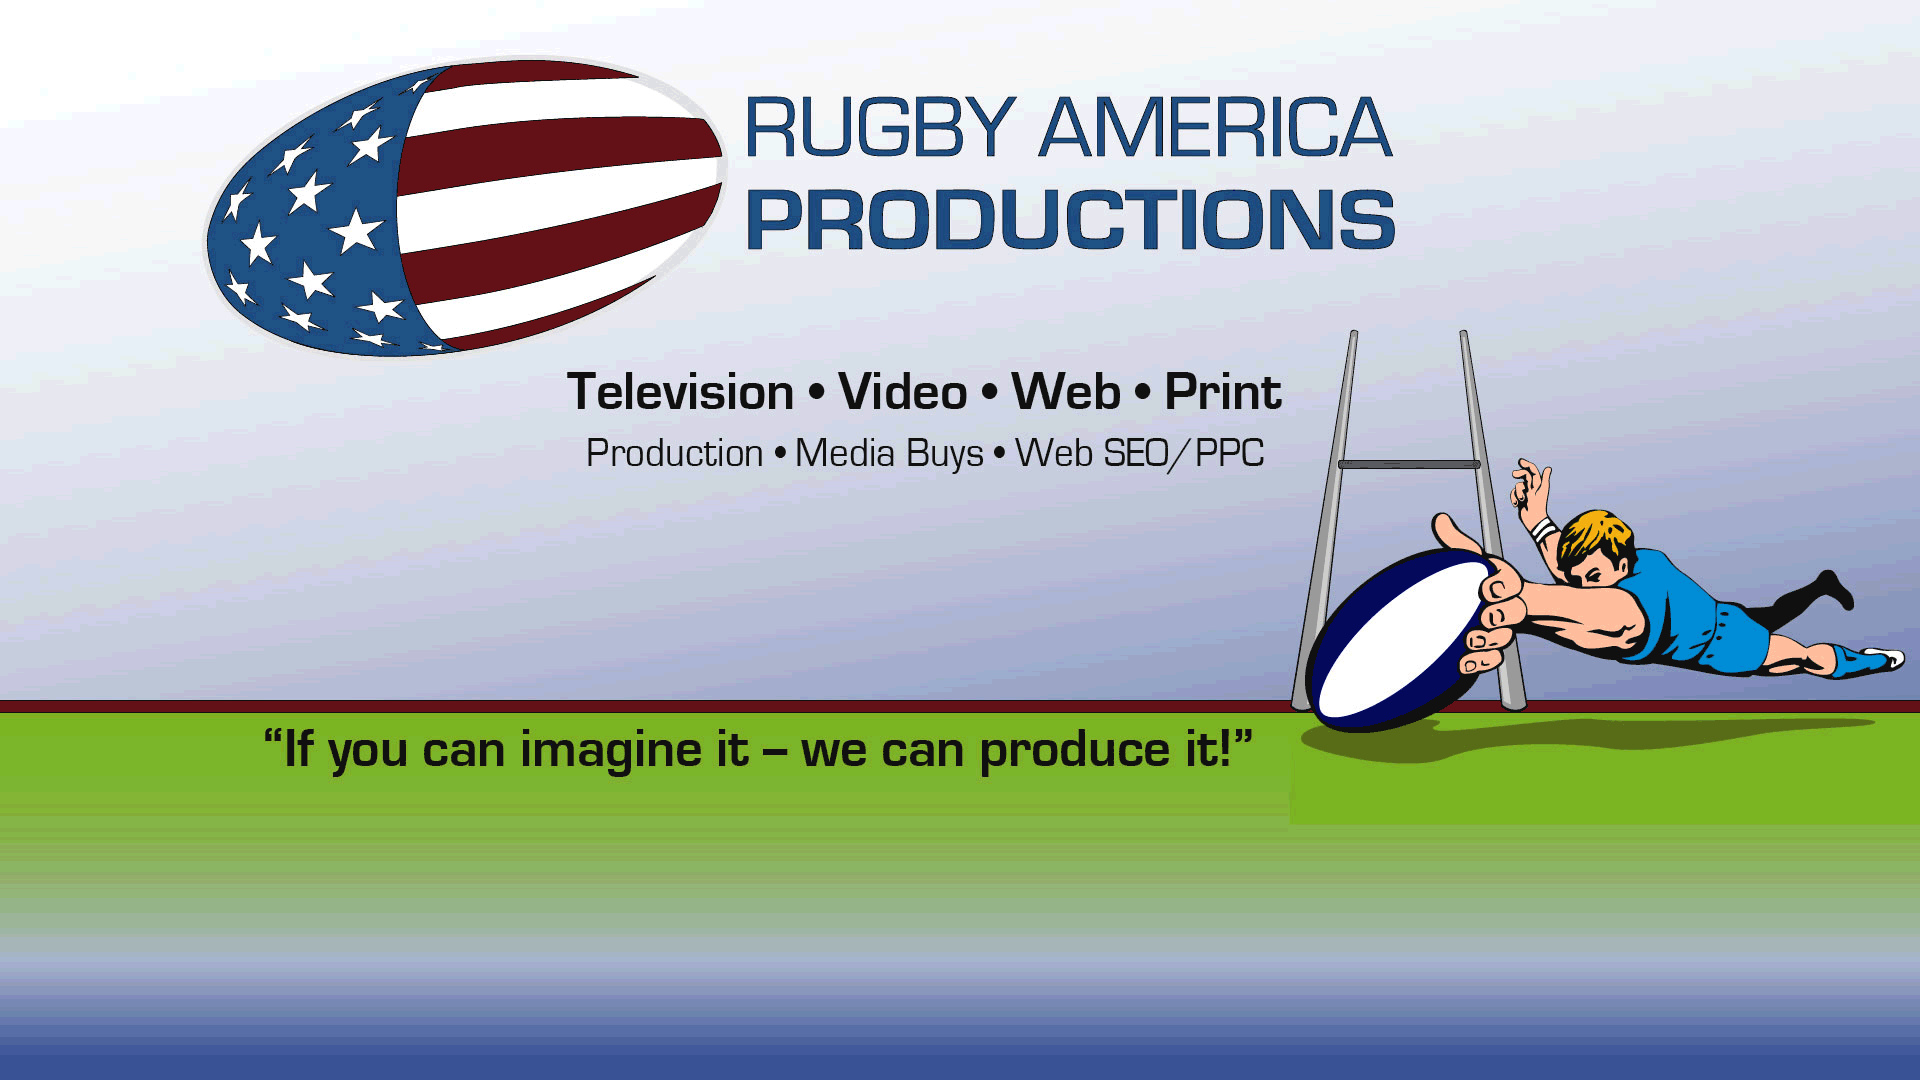 Rugby America Home page and link to Rugby America Productions